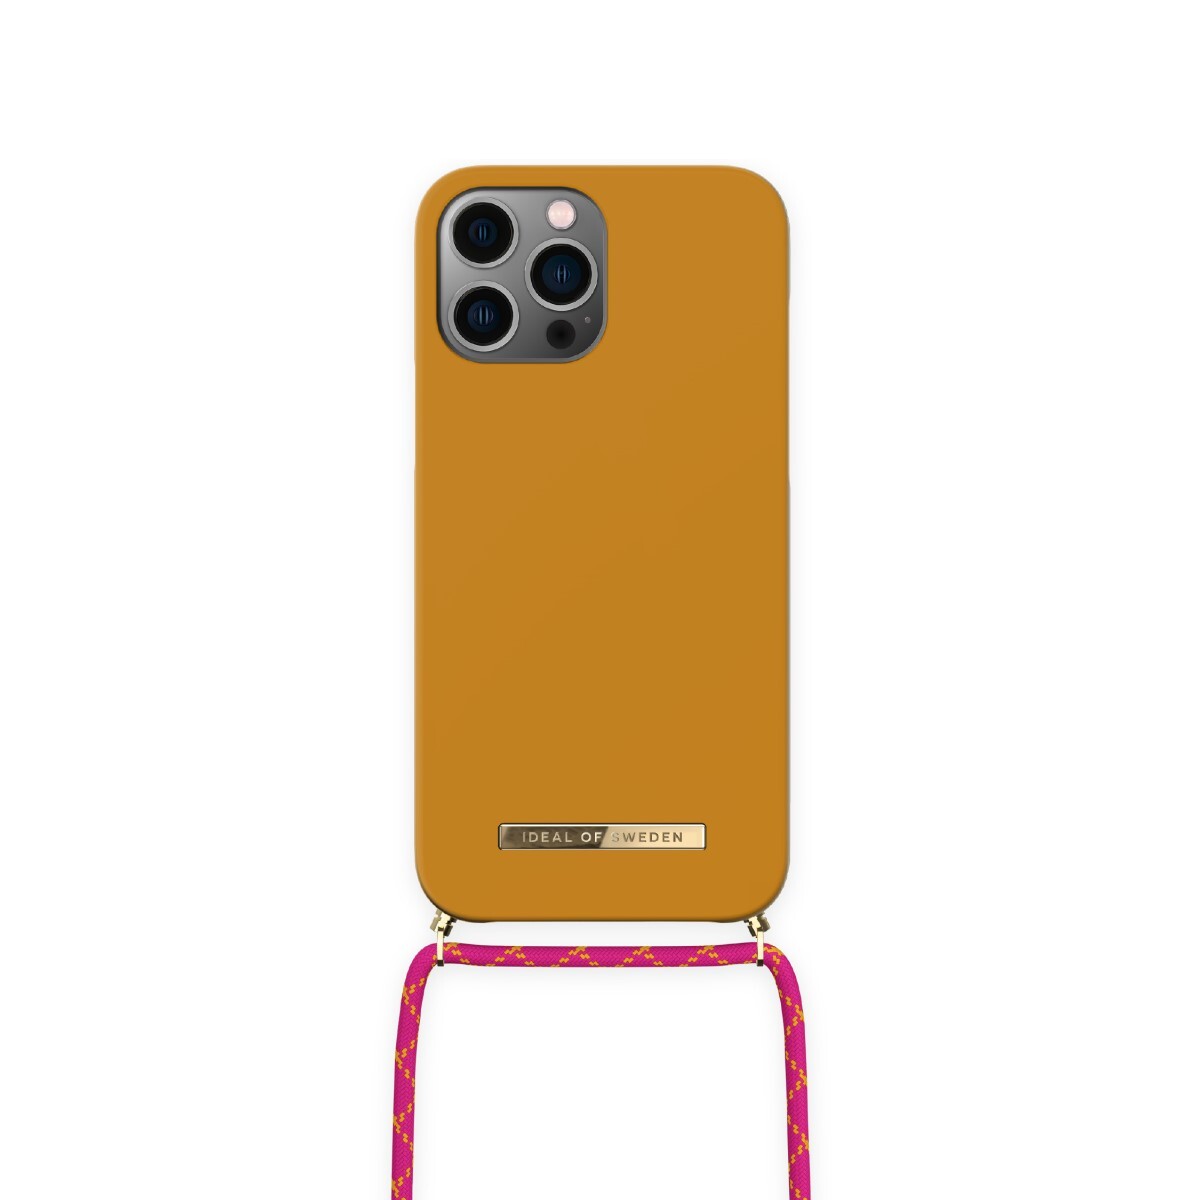 Protector Necklace Case Ideal of Sweden Correa iPhone 12 / 13 Pro Max - Ochre yellow 